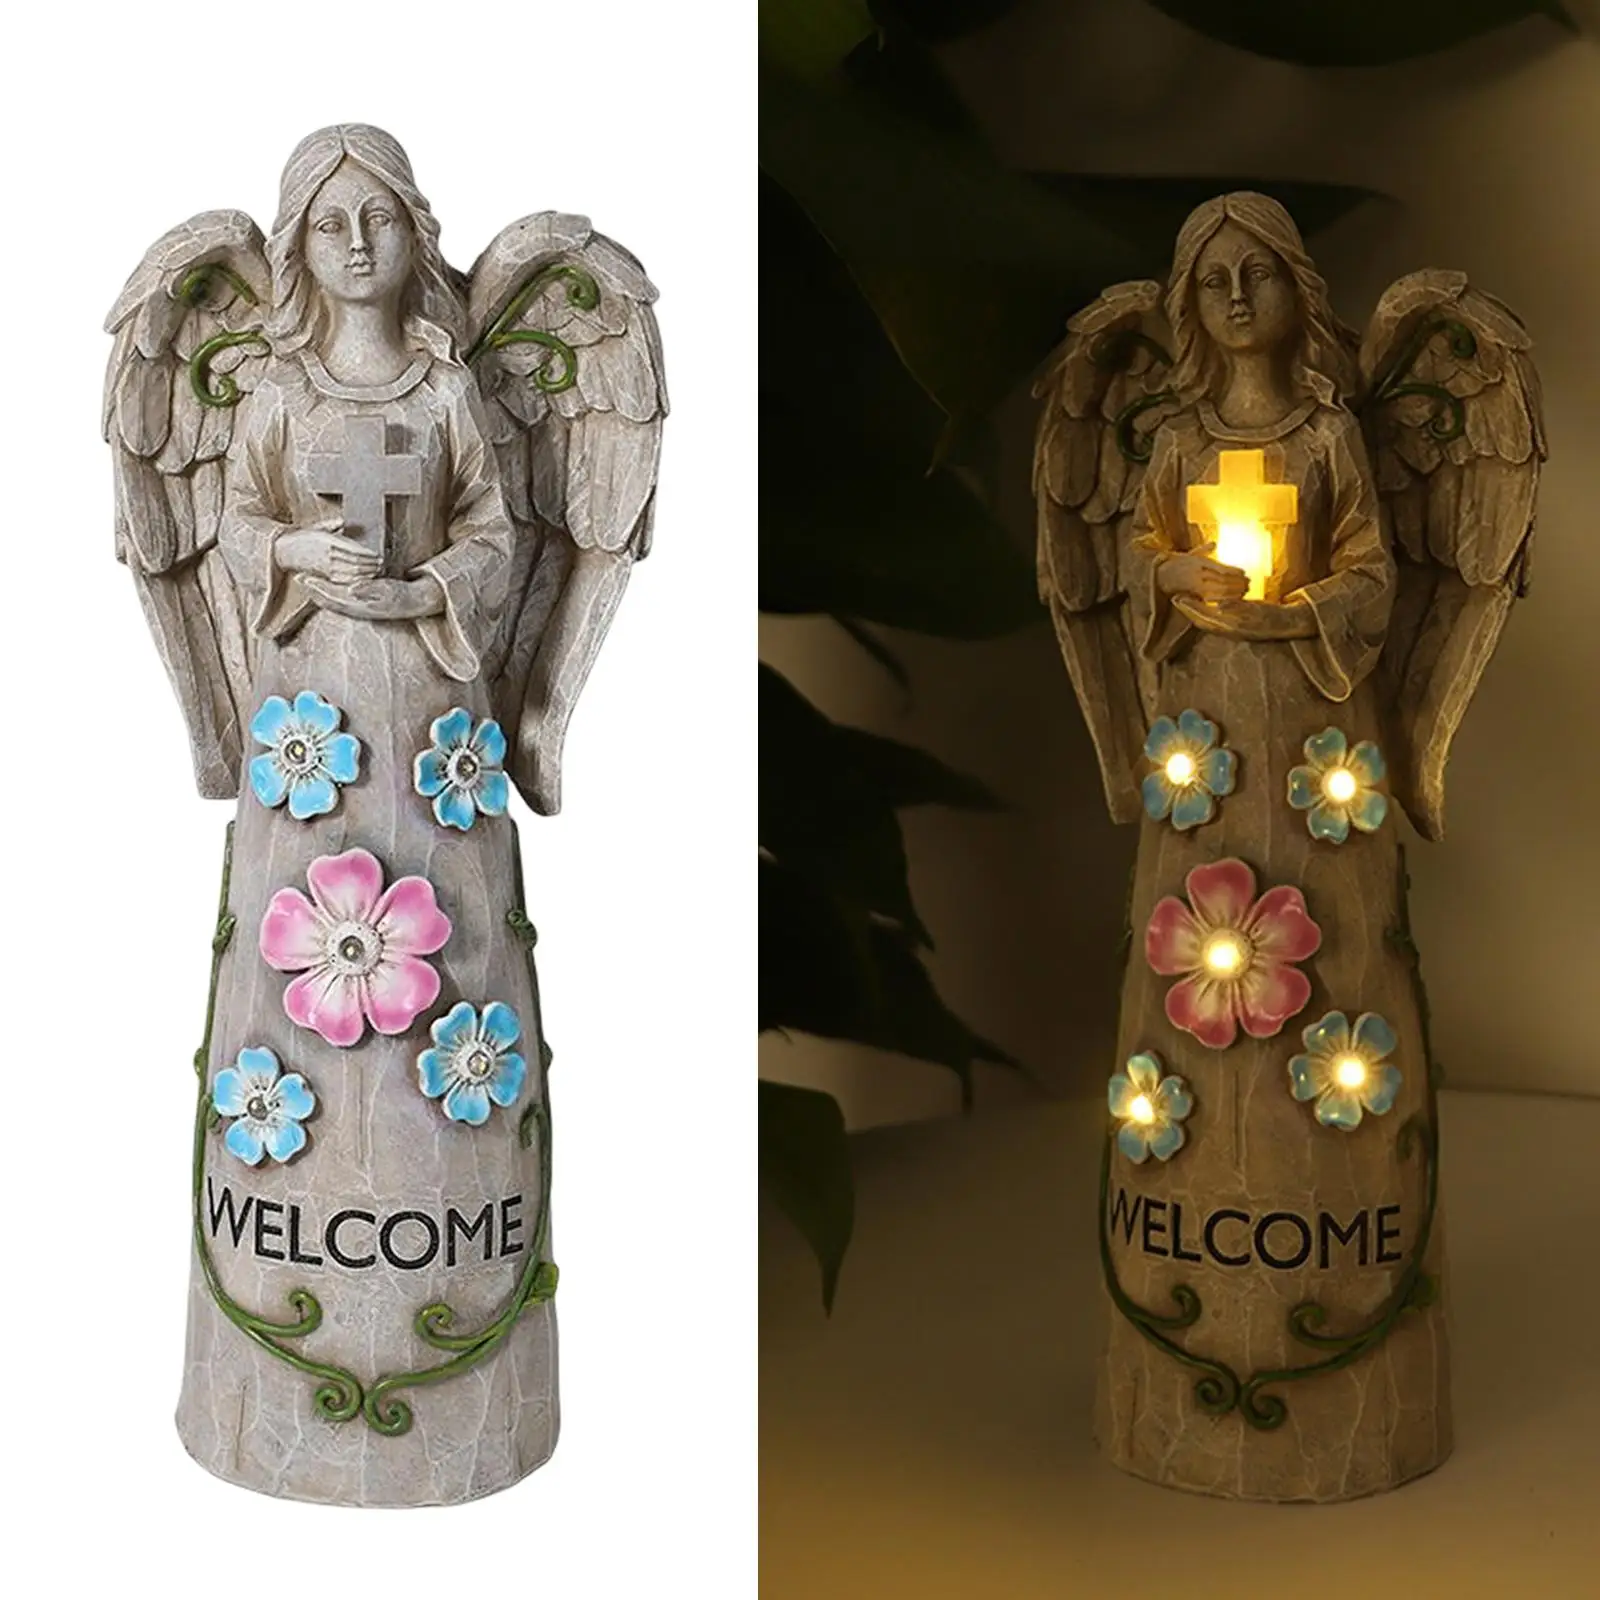 LED Angel Figurine Solar Lamp Sculpture Decor Craft Ornament Praying Welcome Light for Outdoor Garden Living Room Bedroom Patio